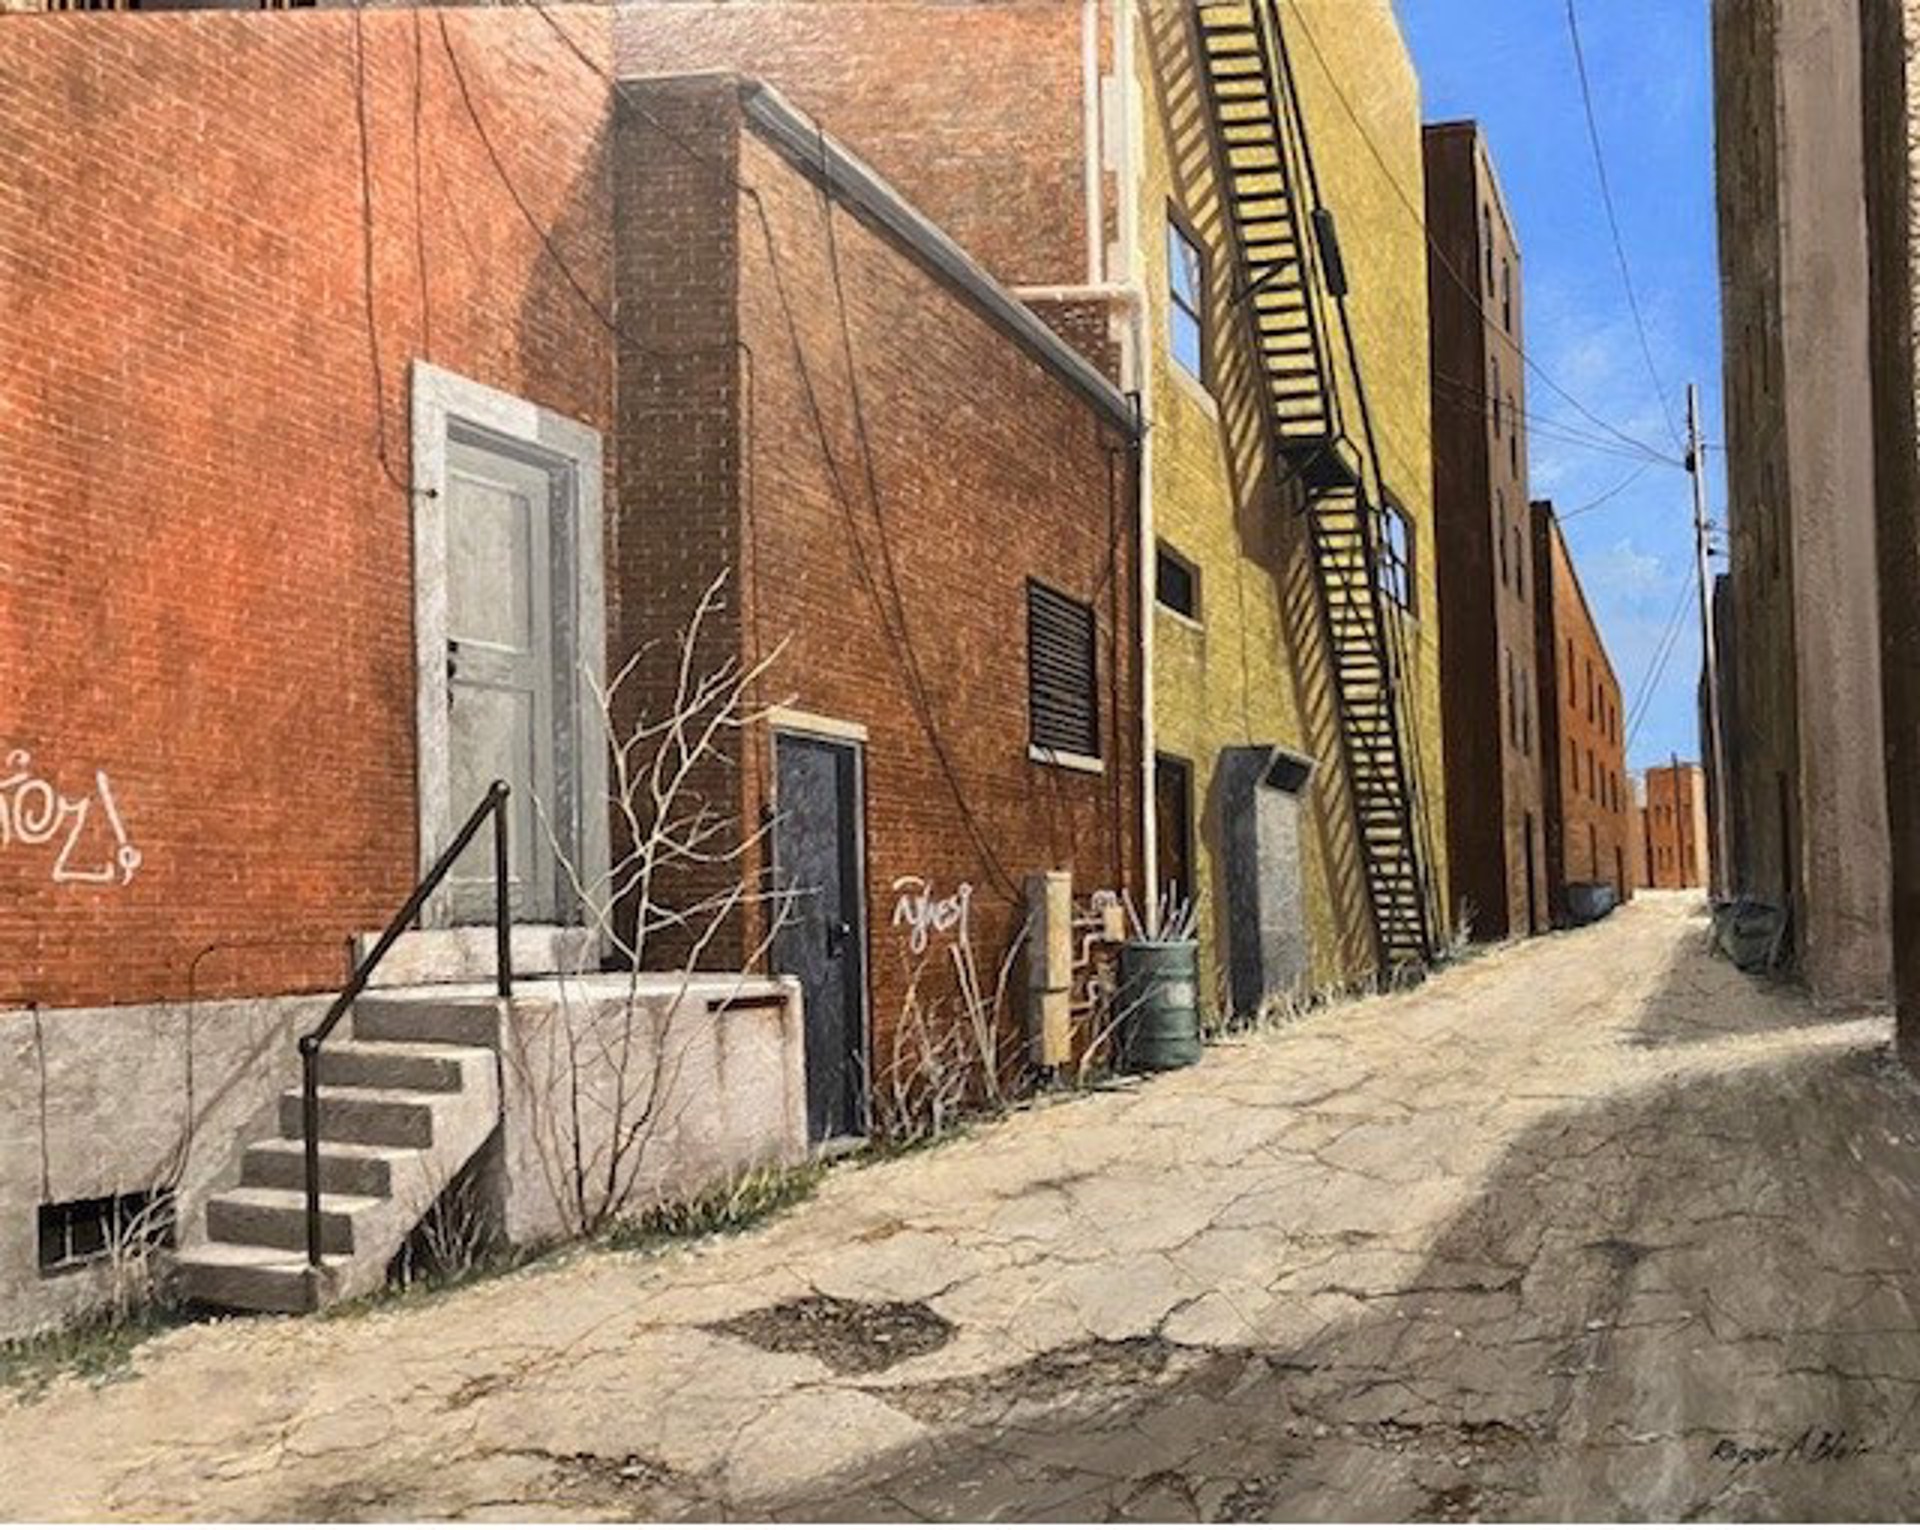 American Alley by Roger Blair